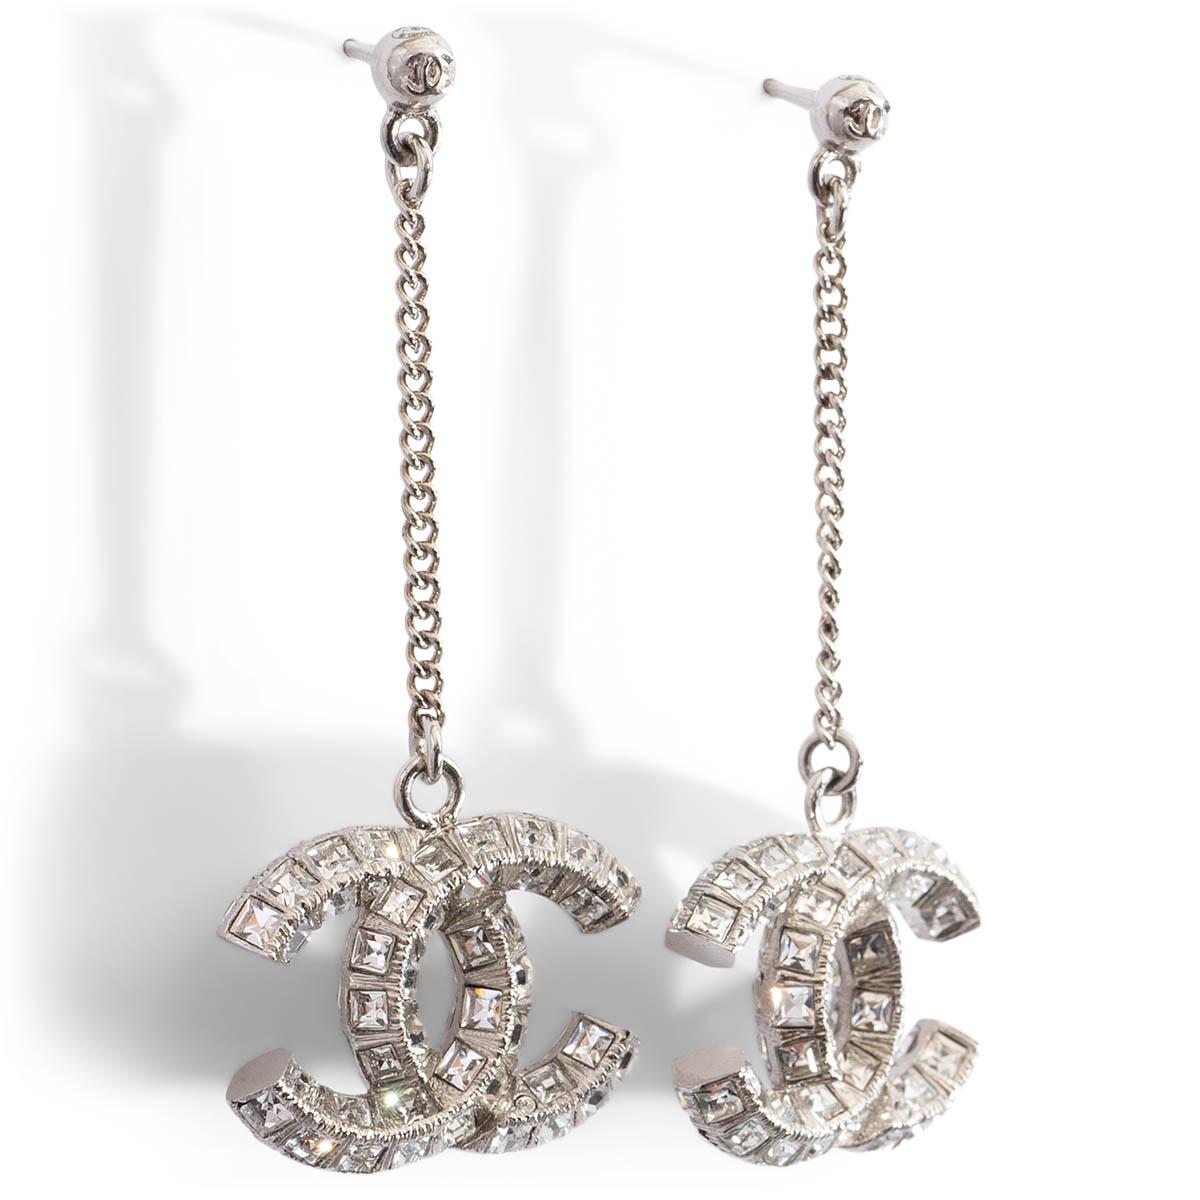 100% authentic Chanel Baguette silver studs drop earrings with a crystal embellished dangling CC. Have been worn once and are in virtually new condition. Includes felt protection and box. 

Measurements
Model	ChanelB20 
Tag Size	OS
Width	2cm